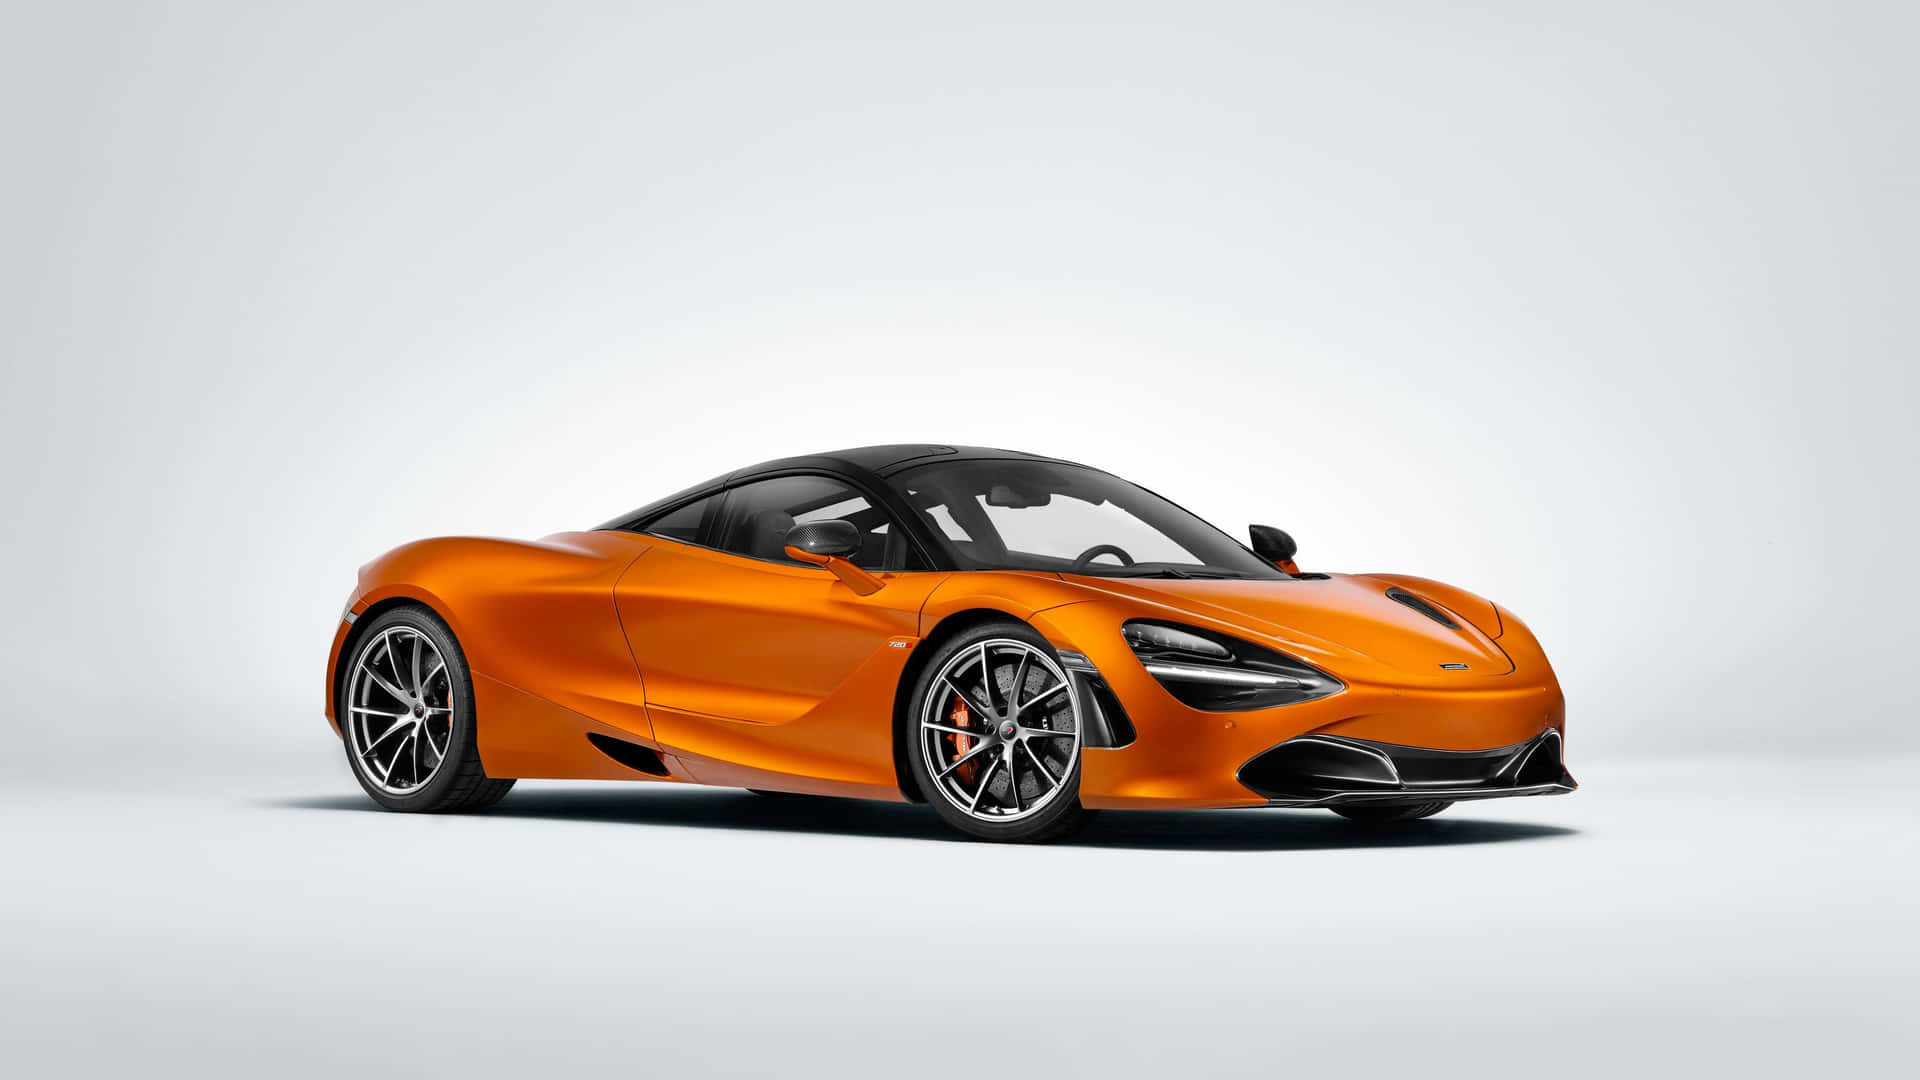 "Witness the Next Level of Supercar Performance with the Mclaren 720s"